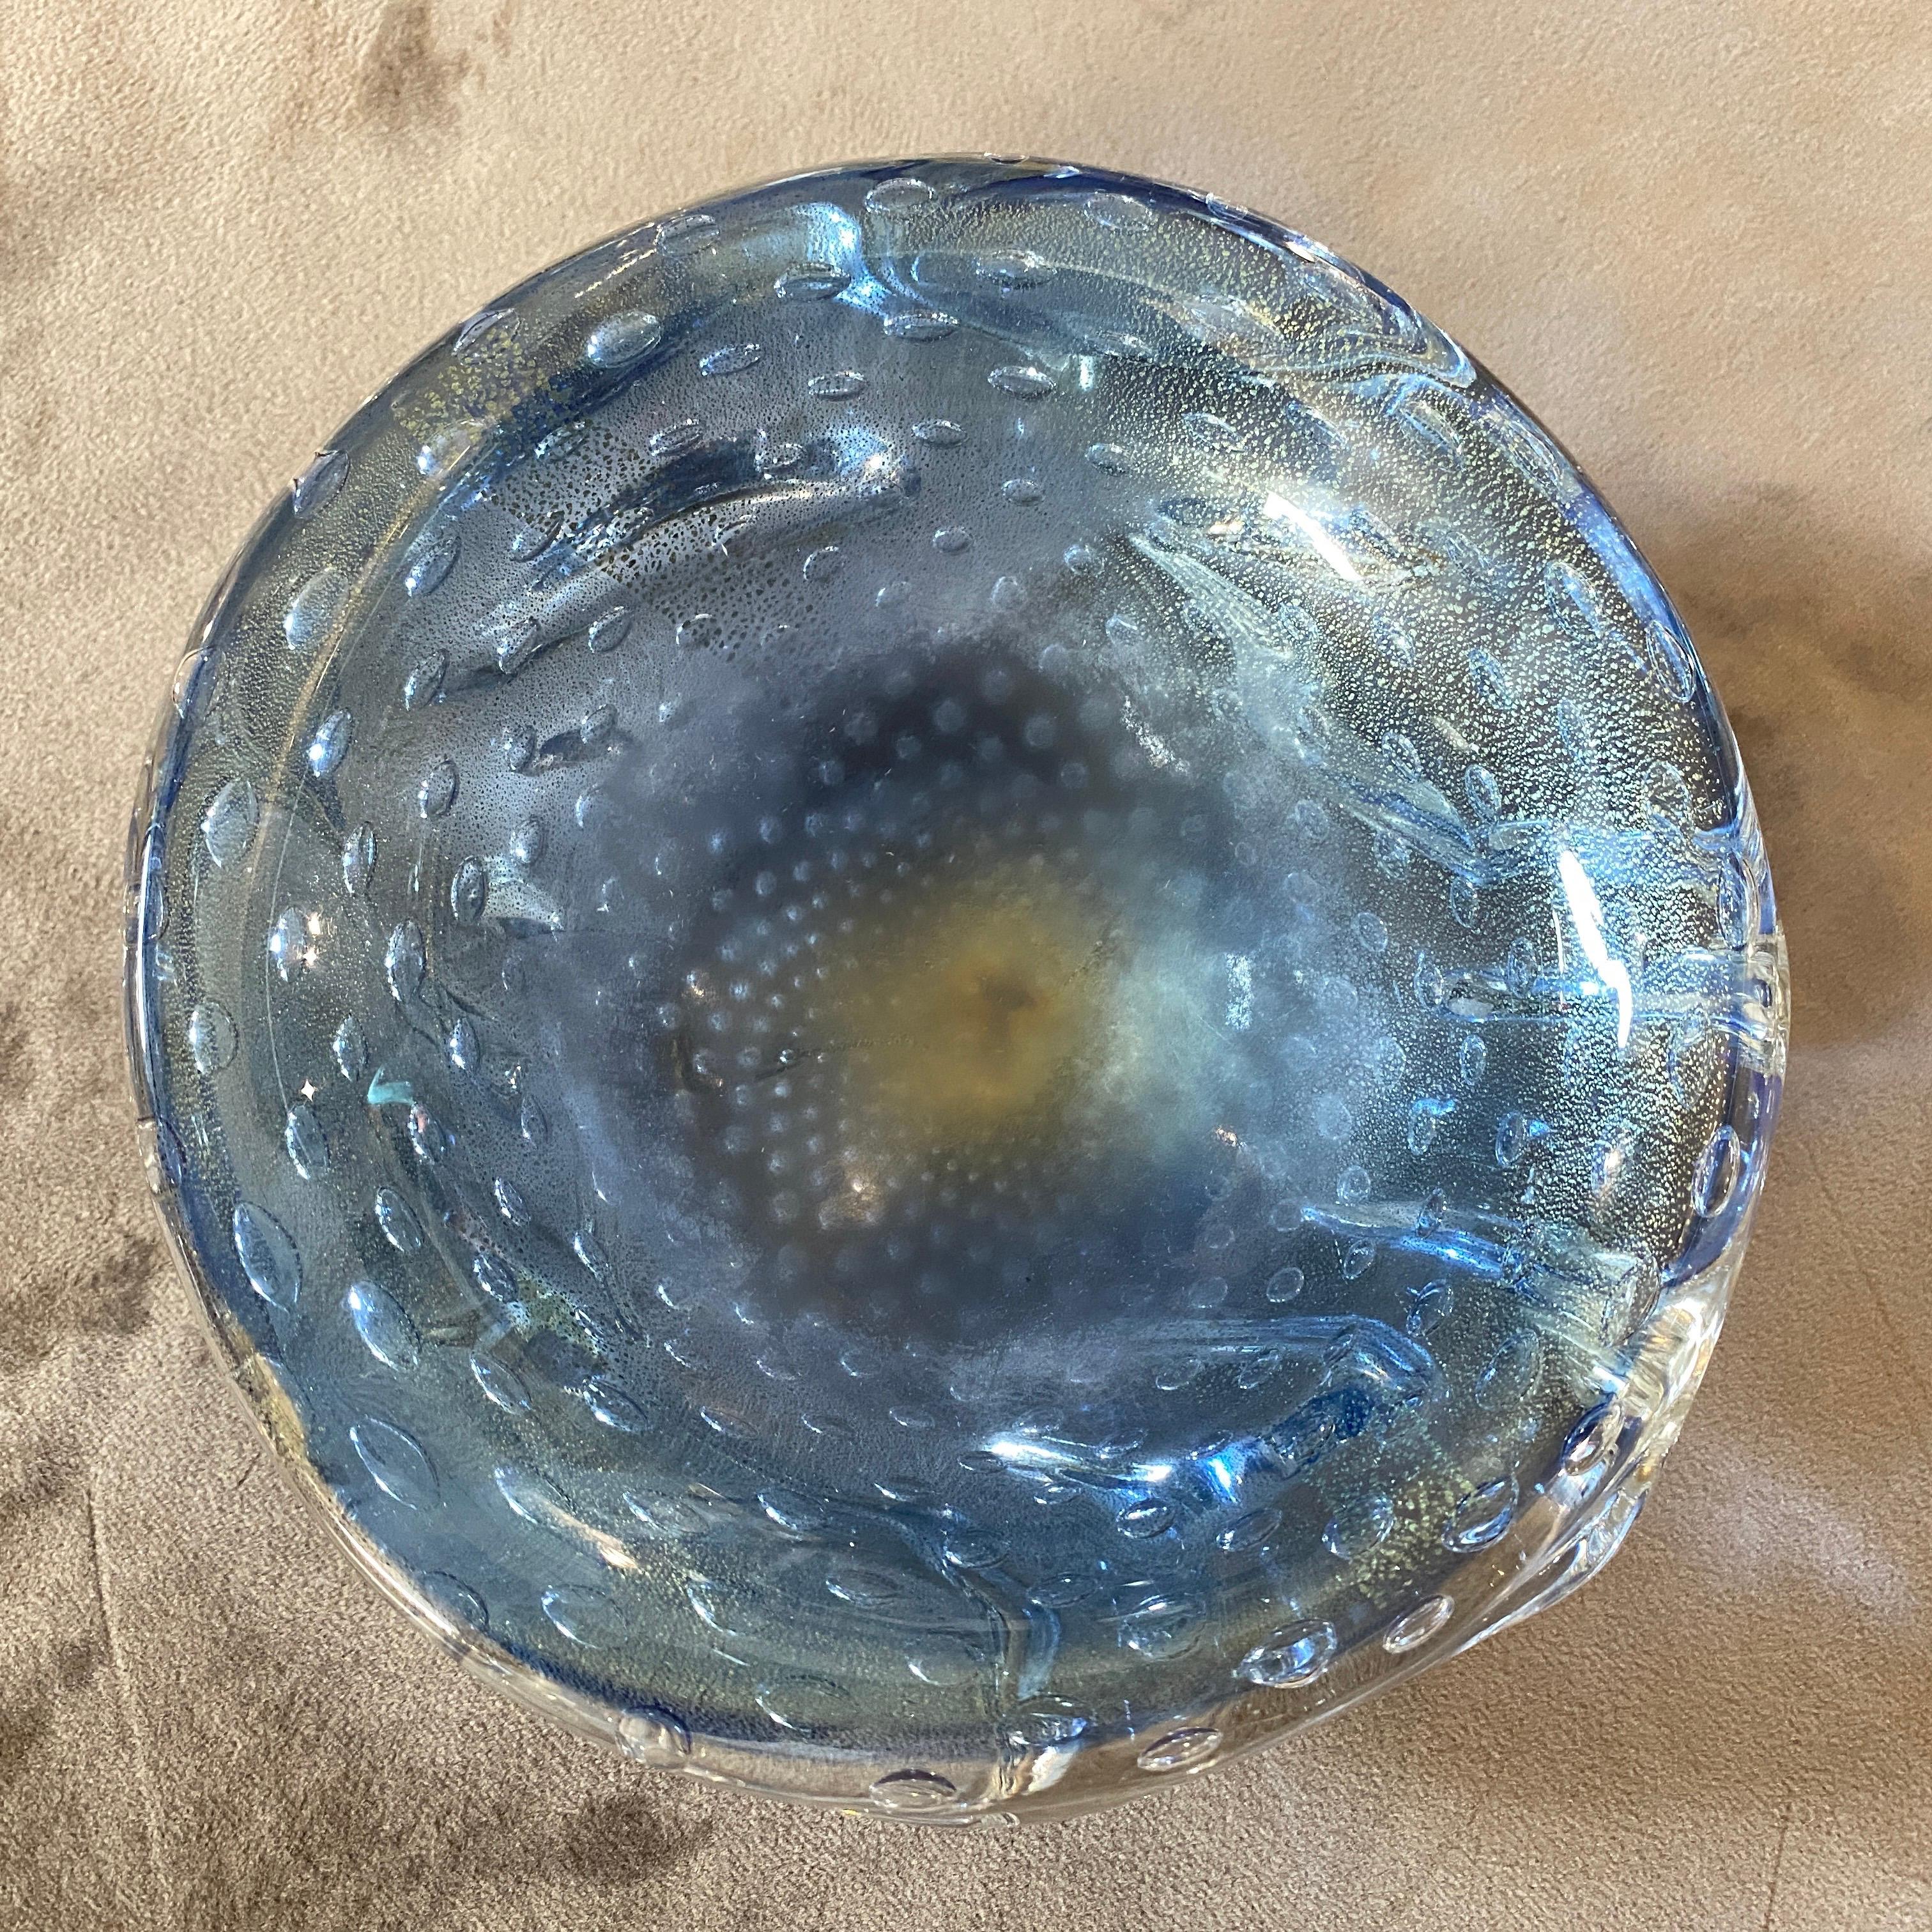 A Murano glass ashtray in perfect conditions. It has been made by Seguso in the 1960s.